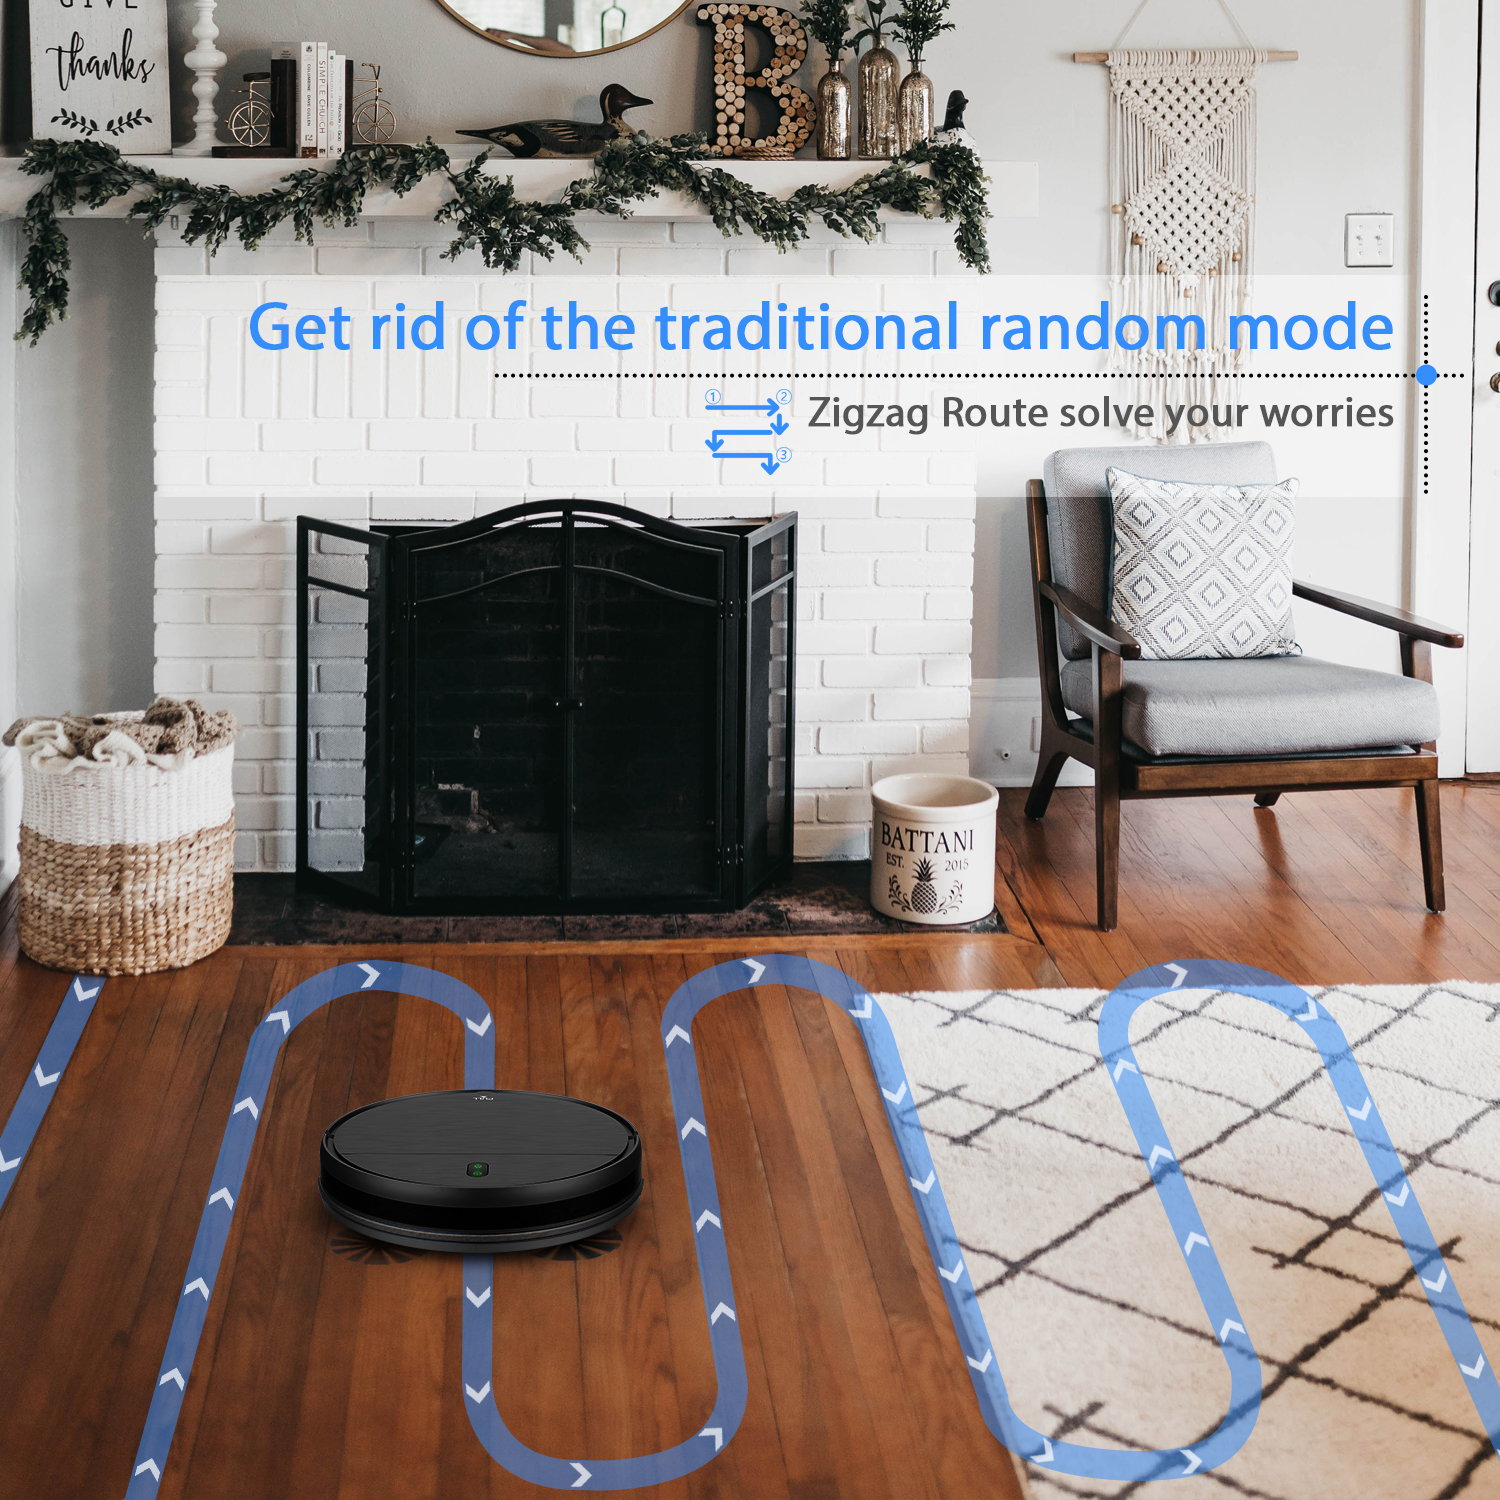 ONSON Robot Vacuum Cleaner, 2 in 1 Robot Vacuum and Mop Combo, With WIFI Connection For Pet Hair, Hard Floor - image 4 of 9